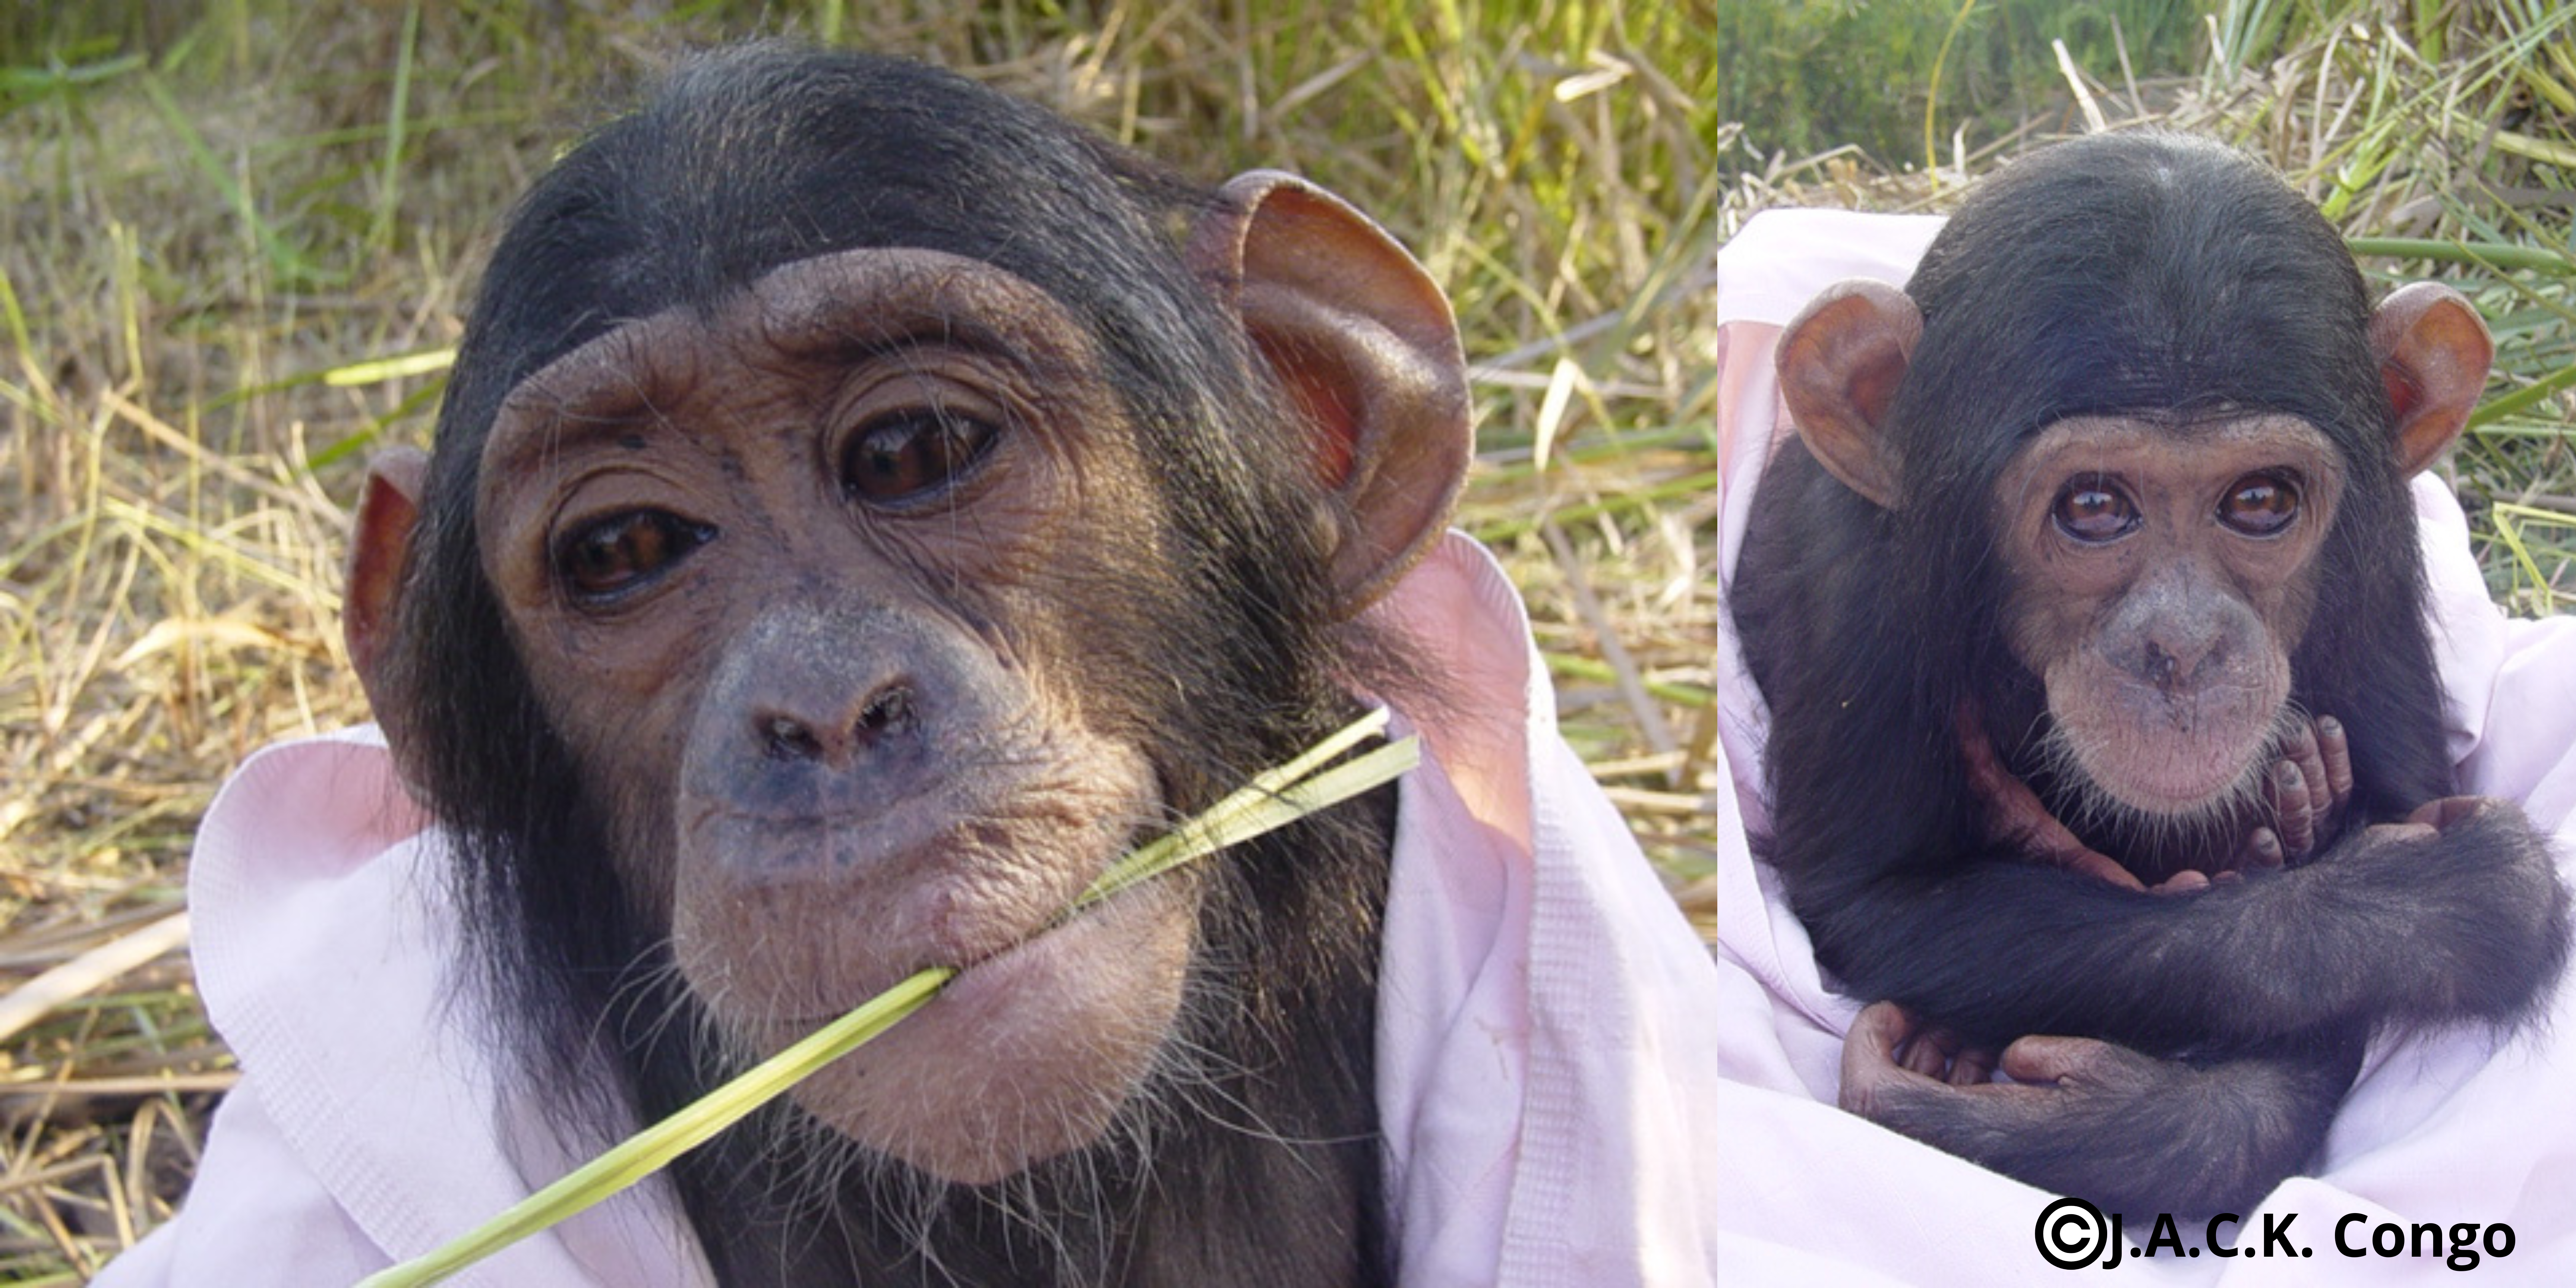 CHITA, one of the oldest chimpanzees at J.A.C.K.